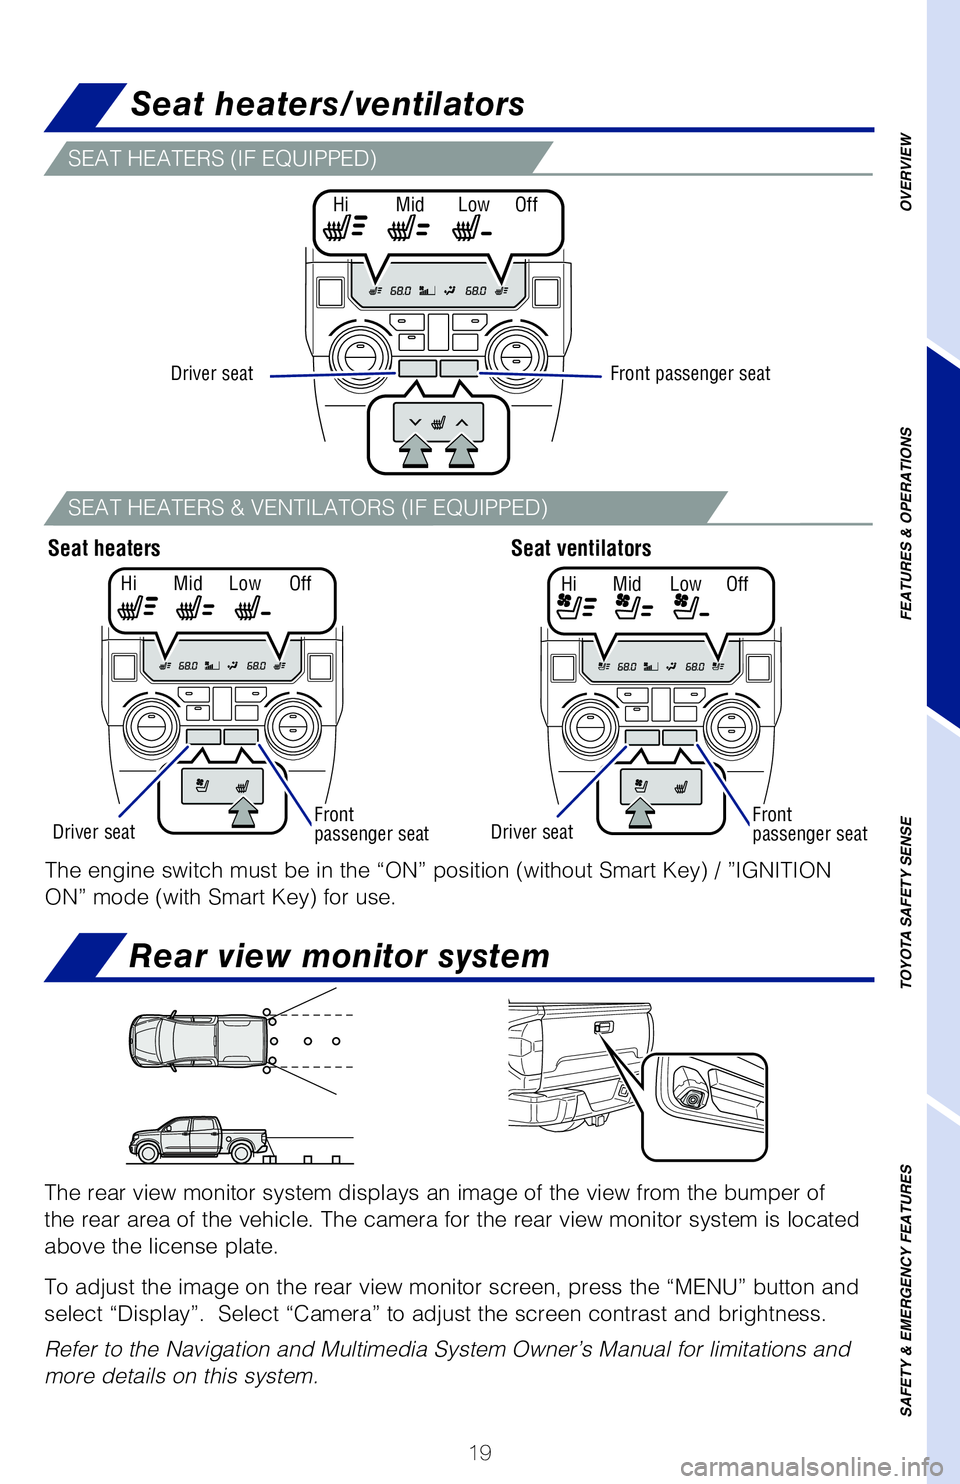 TOYOTA TUNDRA 2020  Owners Manual (in English) 19
SEAT HEATERS (IF EQUIPPED)
SEAT HEATERS & VENTILATORS (IF EQUIPPED)
The rear view monitor system displays an image of the view from the bumper of  
the rear area of the vehicle. The camera for the 